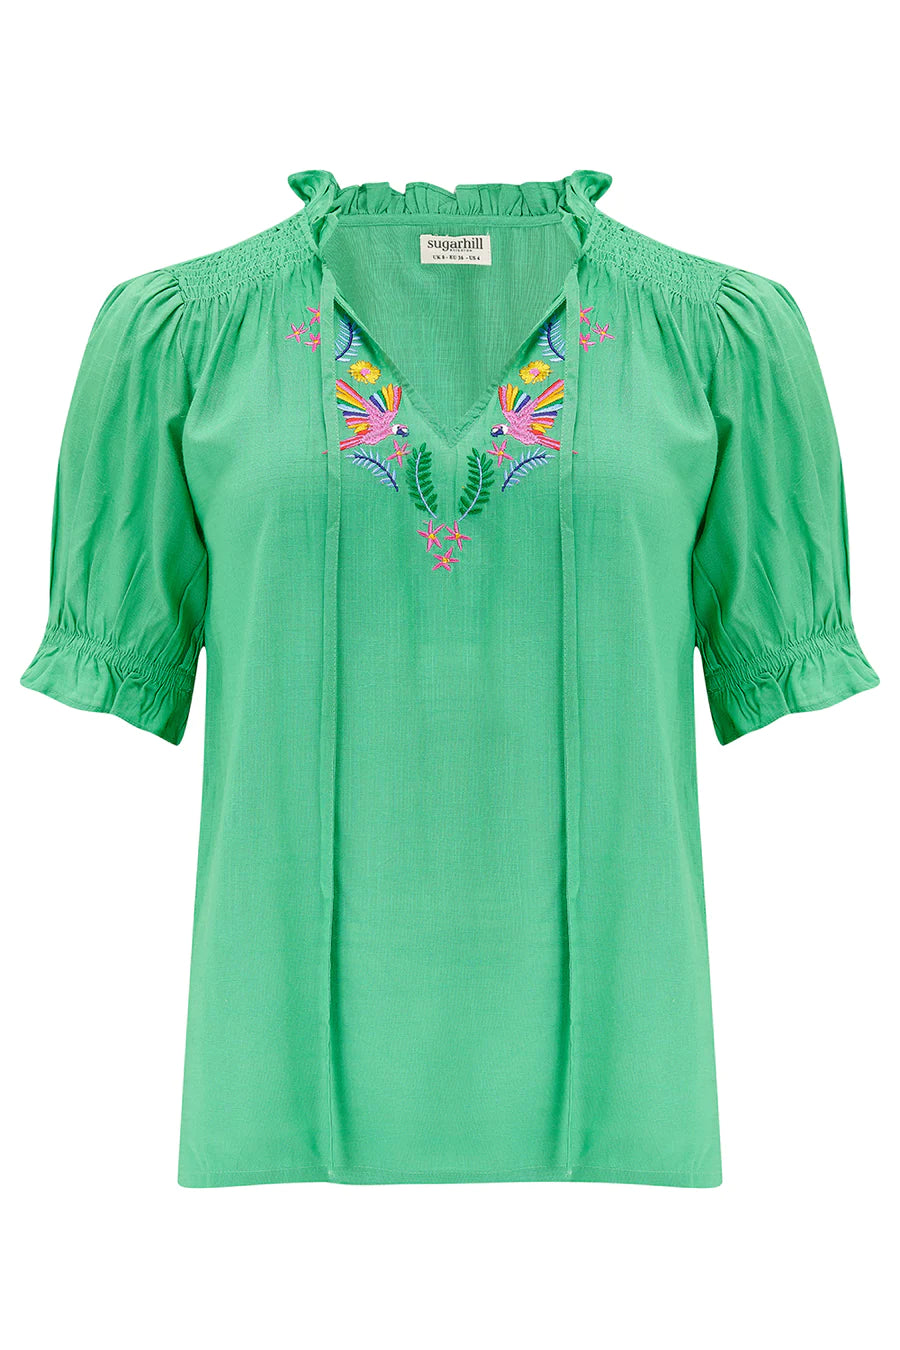 Angelique Top (Green Rainbow Parrots Embroidery)